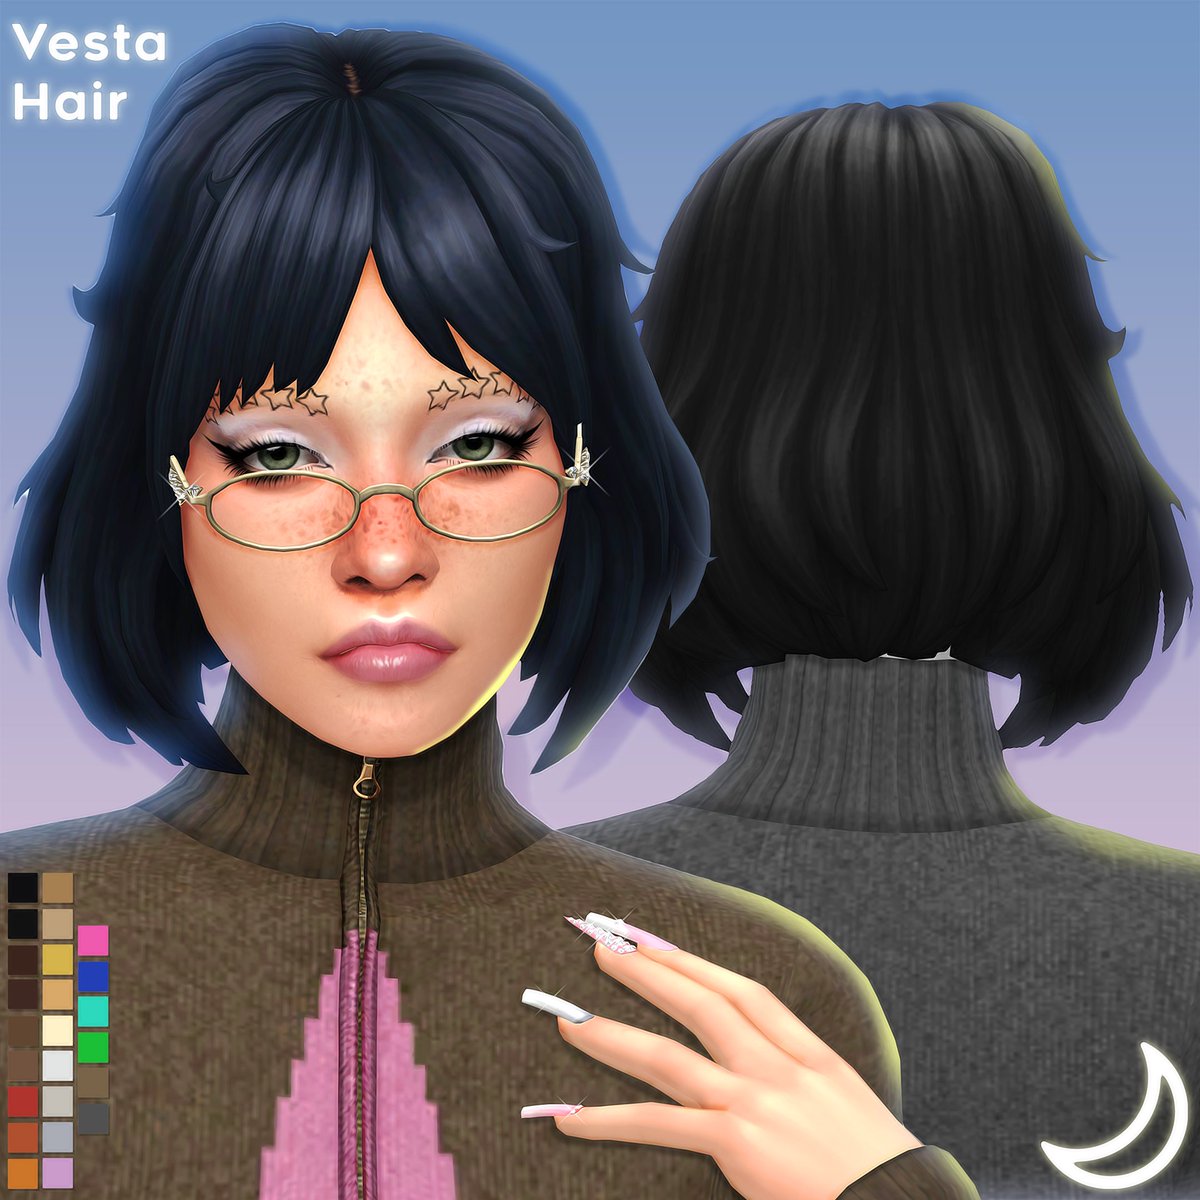 VESTA HAIR Download Early on my Patreon 🔗tumblr.com/imvikai/746667… Public Release 04-23 #TheSims4 #ts4cc #s4cc